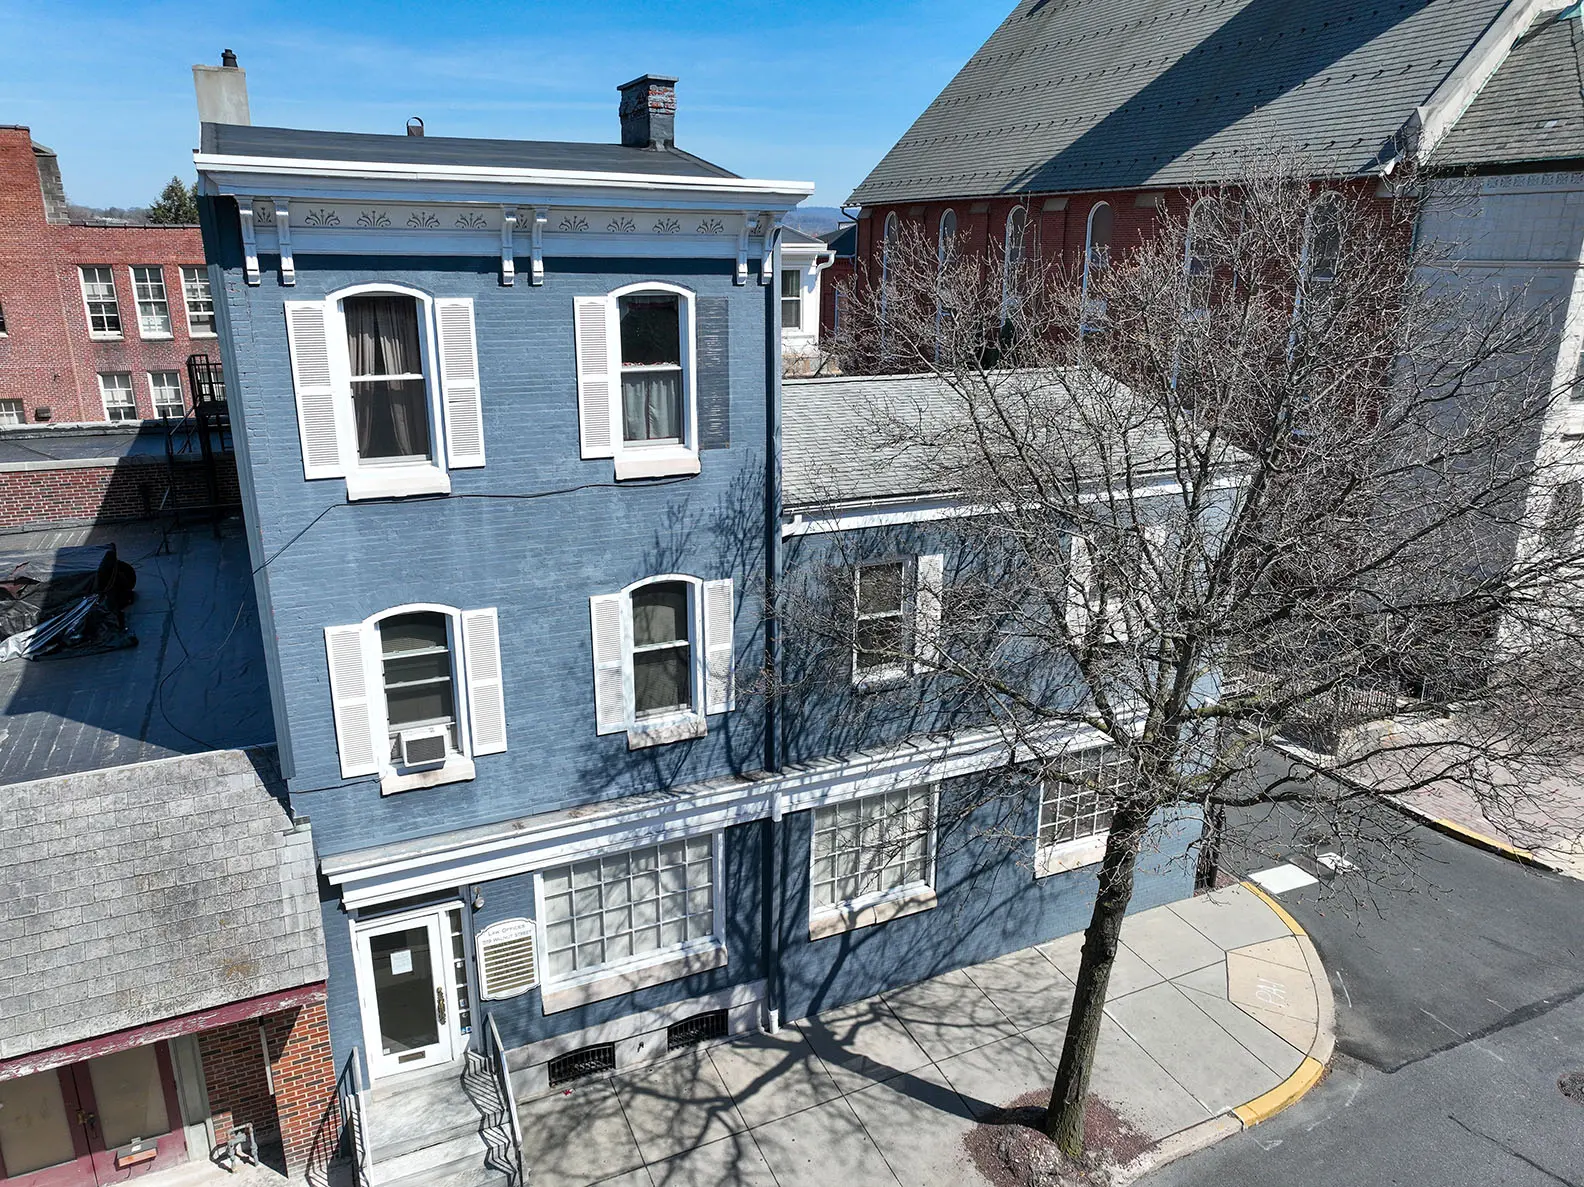 An aerial shot of 519 Walnut Street in Reading, PA